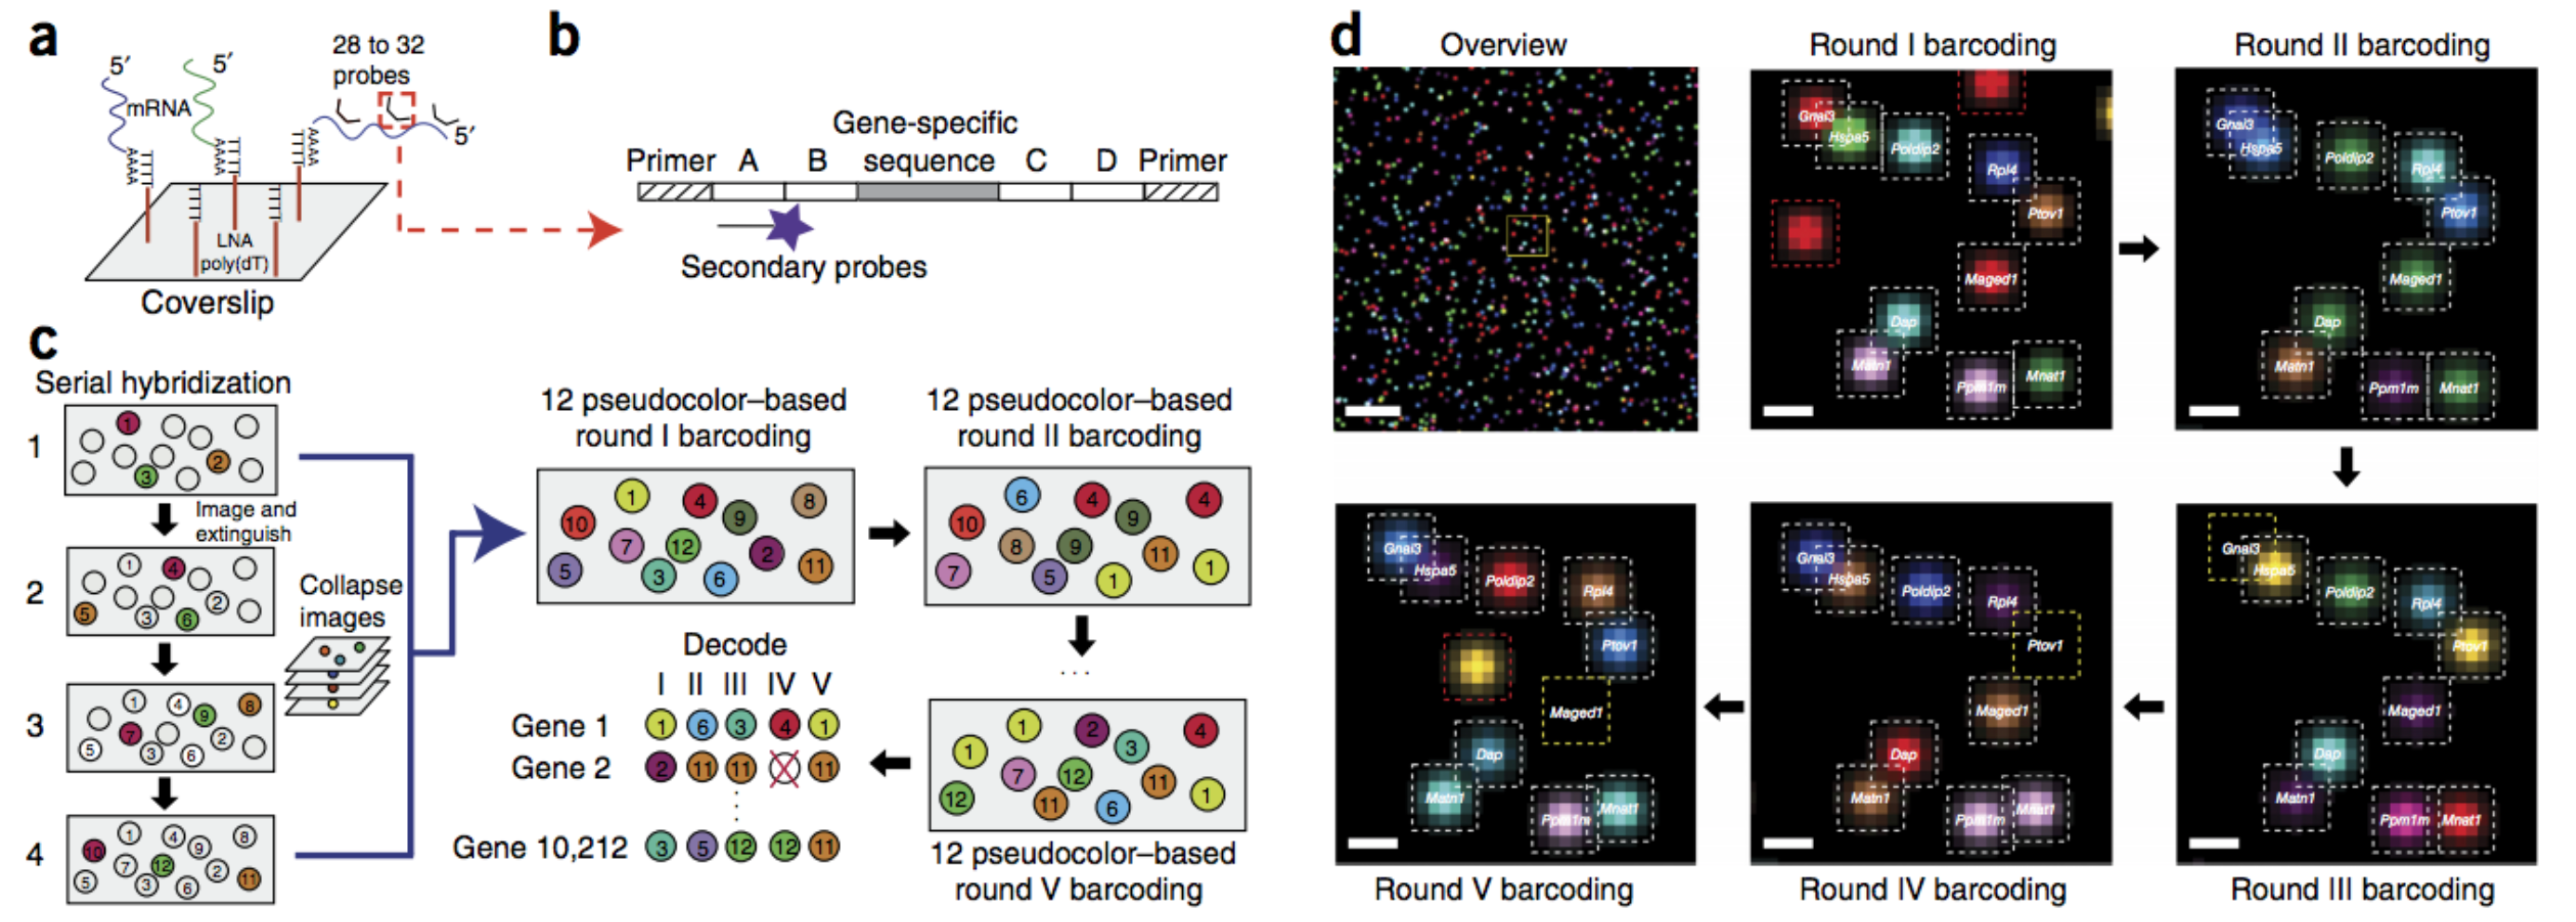 Profiling the transciptome with RNA SPOTs 